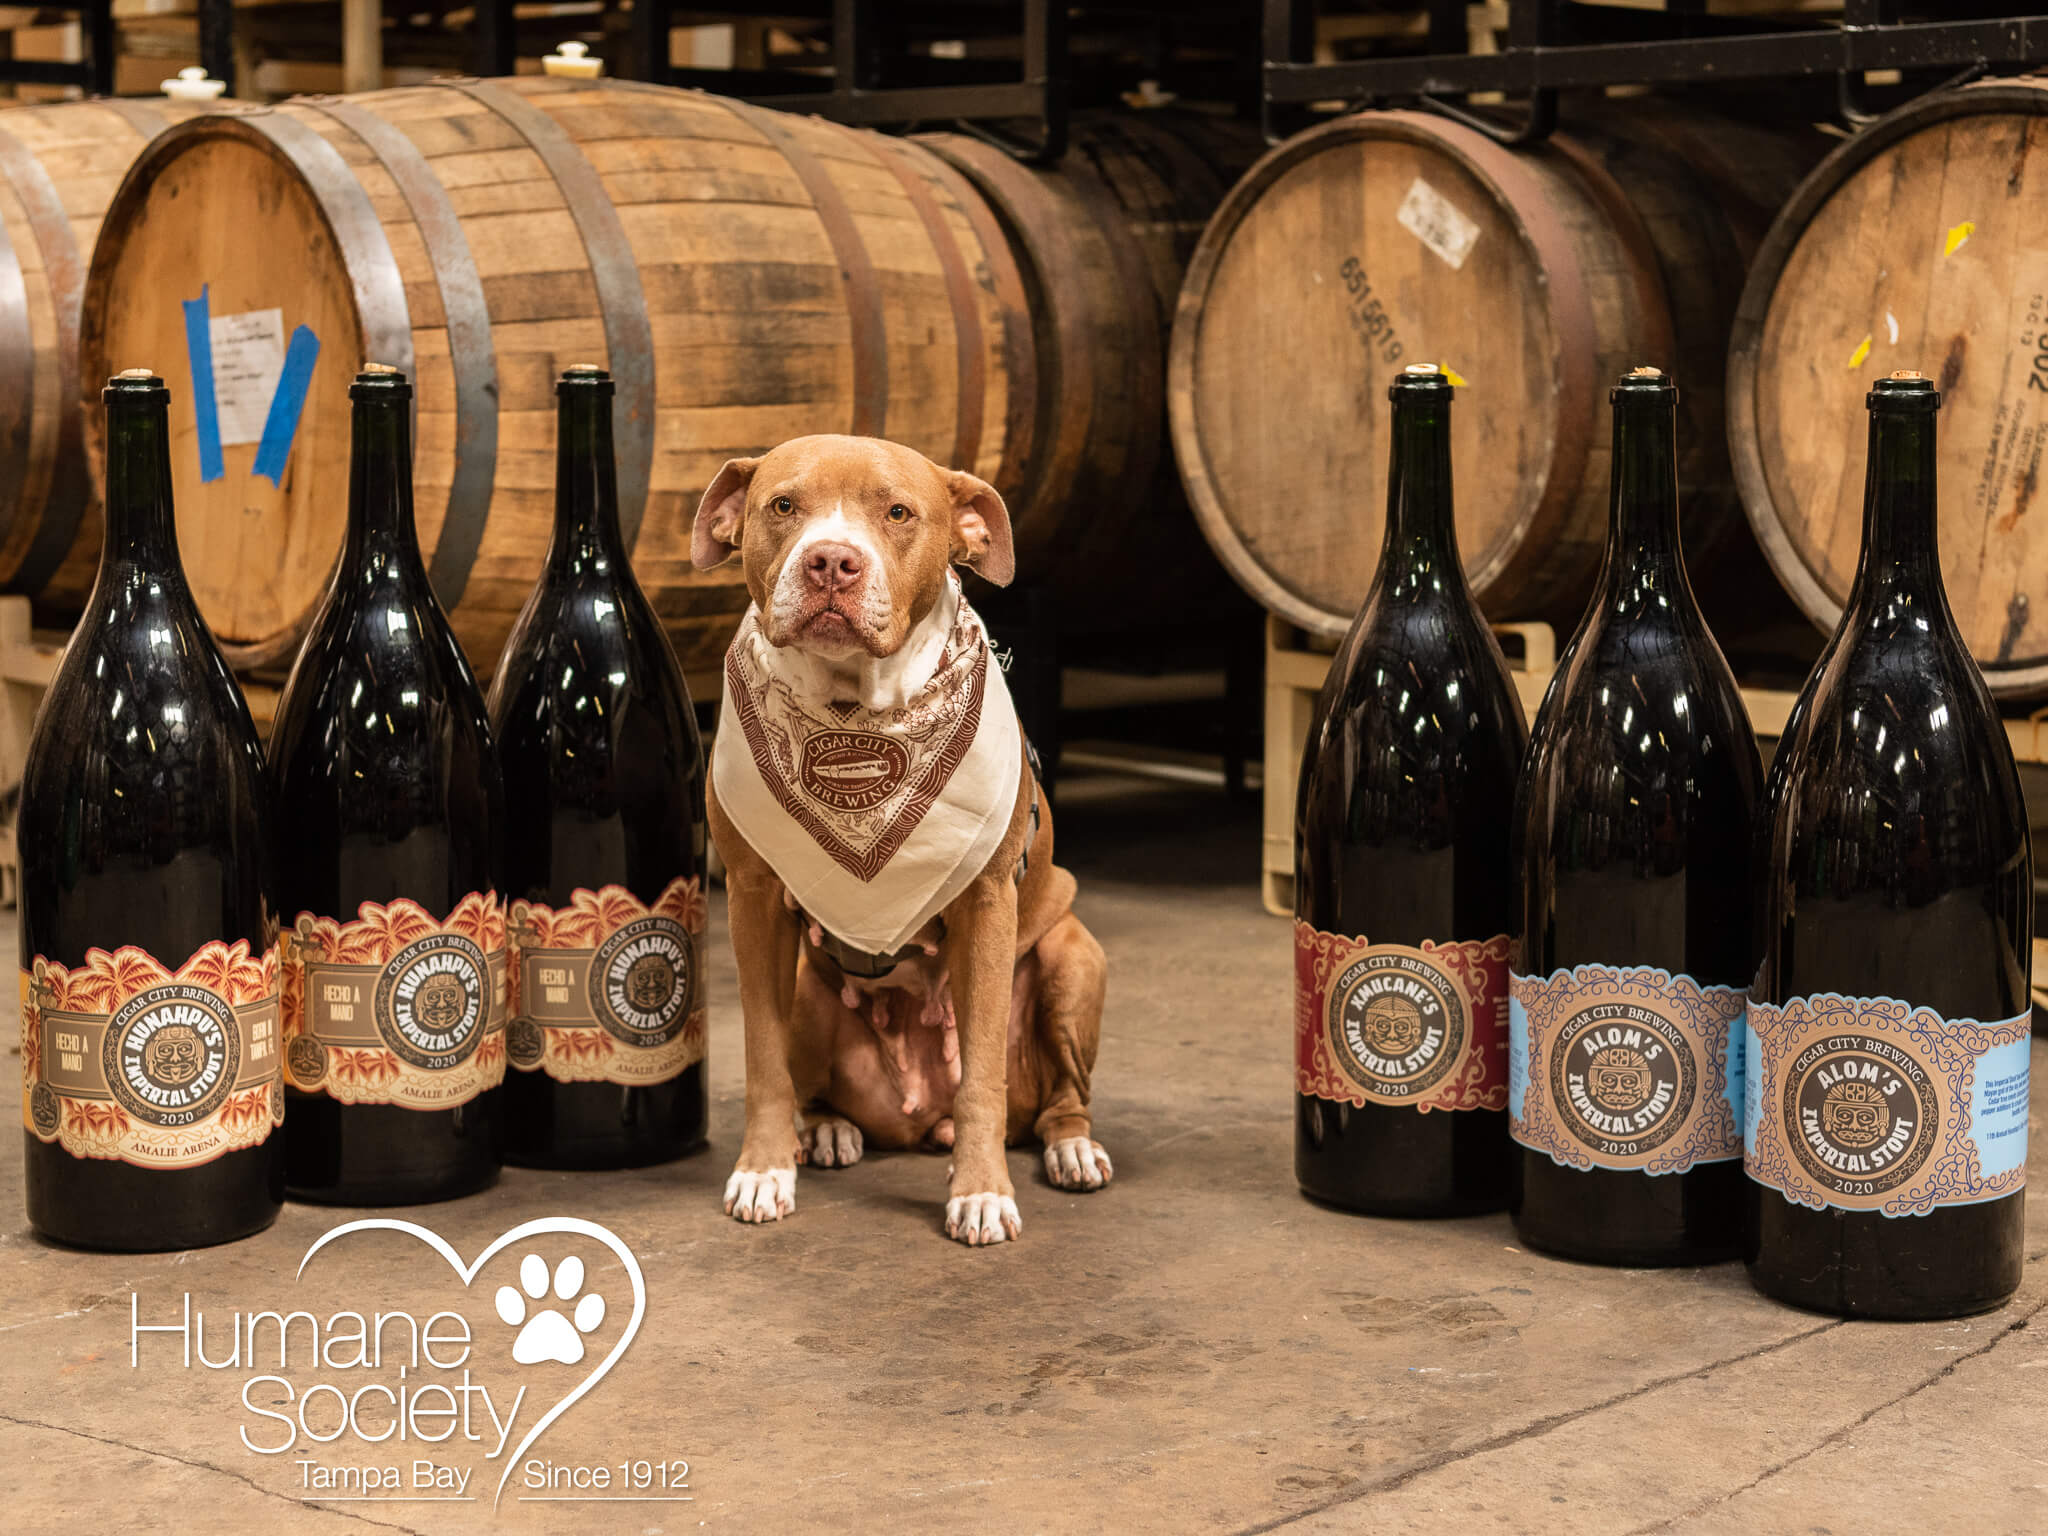 A dog sits amongst six 9-liter bottles of Hunahpu's Imperial Stout, Xmucane's Imperial Stout, and Alom's Imperial Stout.